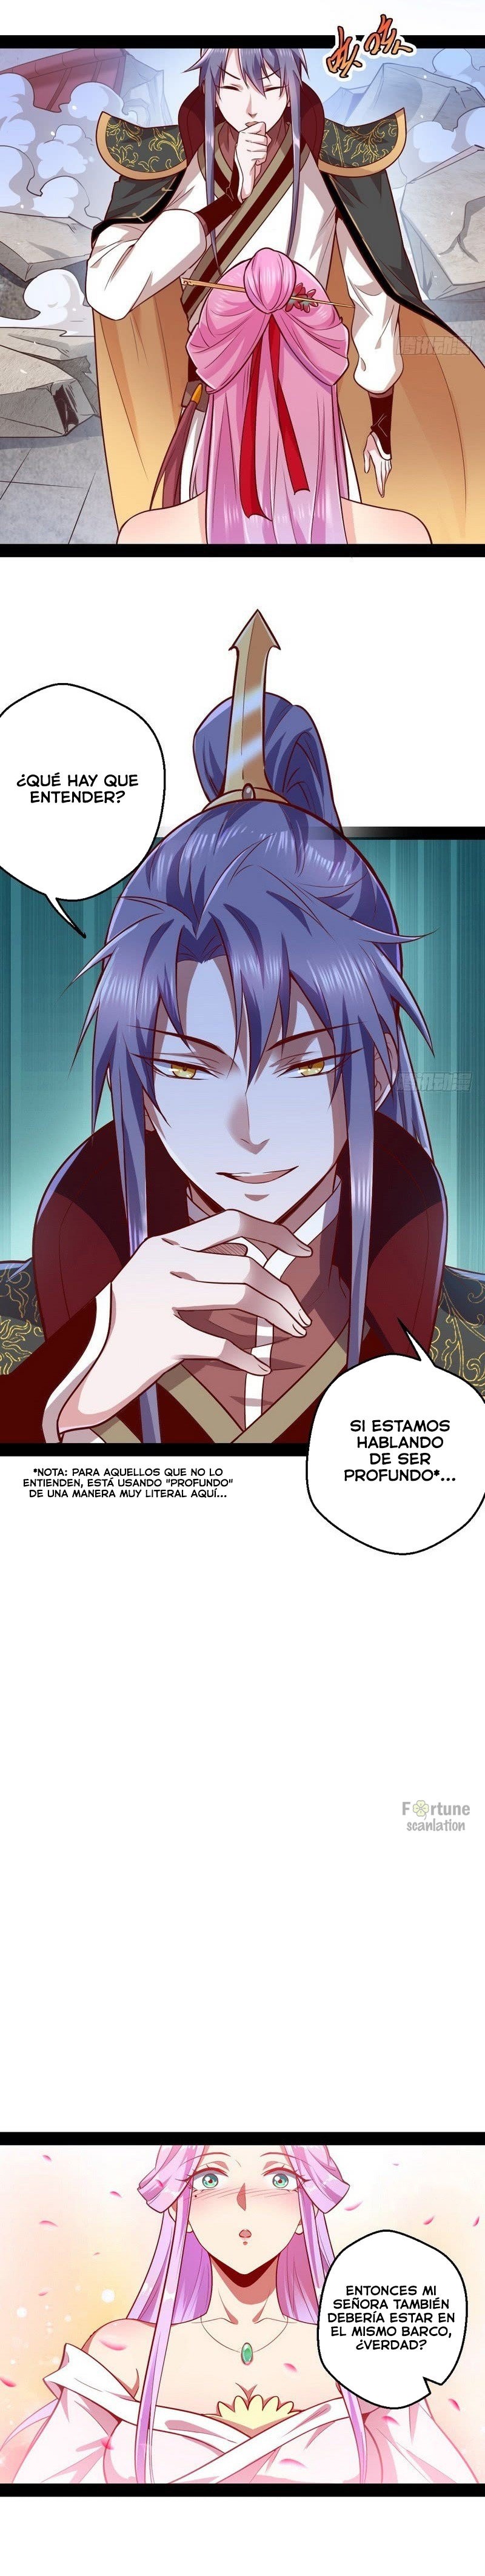 Manga Soy un dios maligno Chapter 24 image number 14